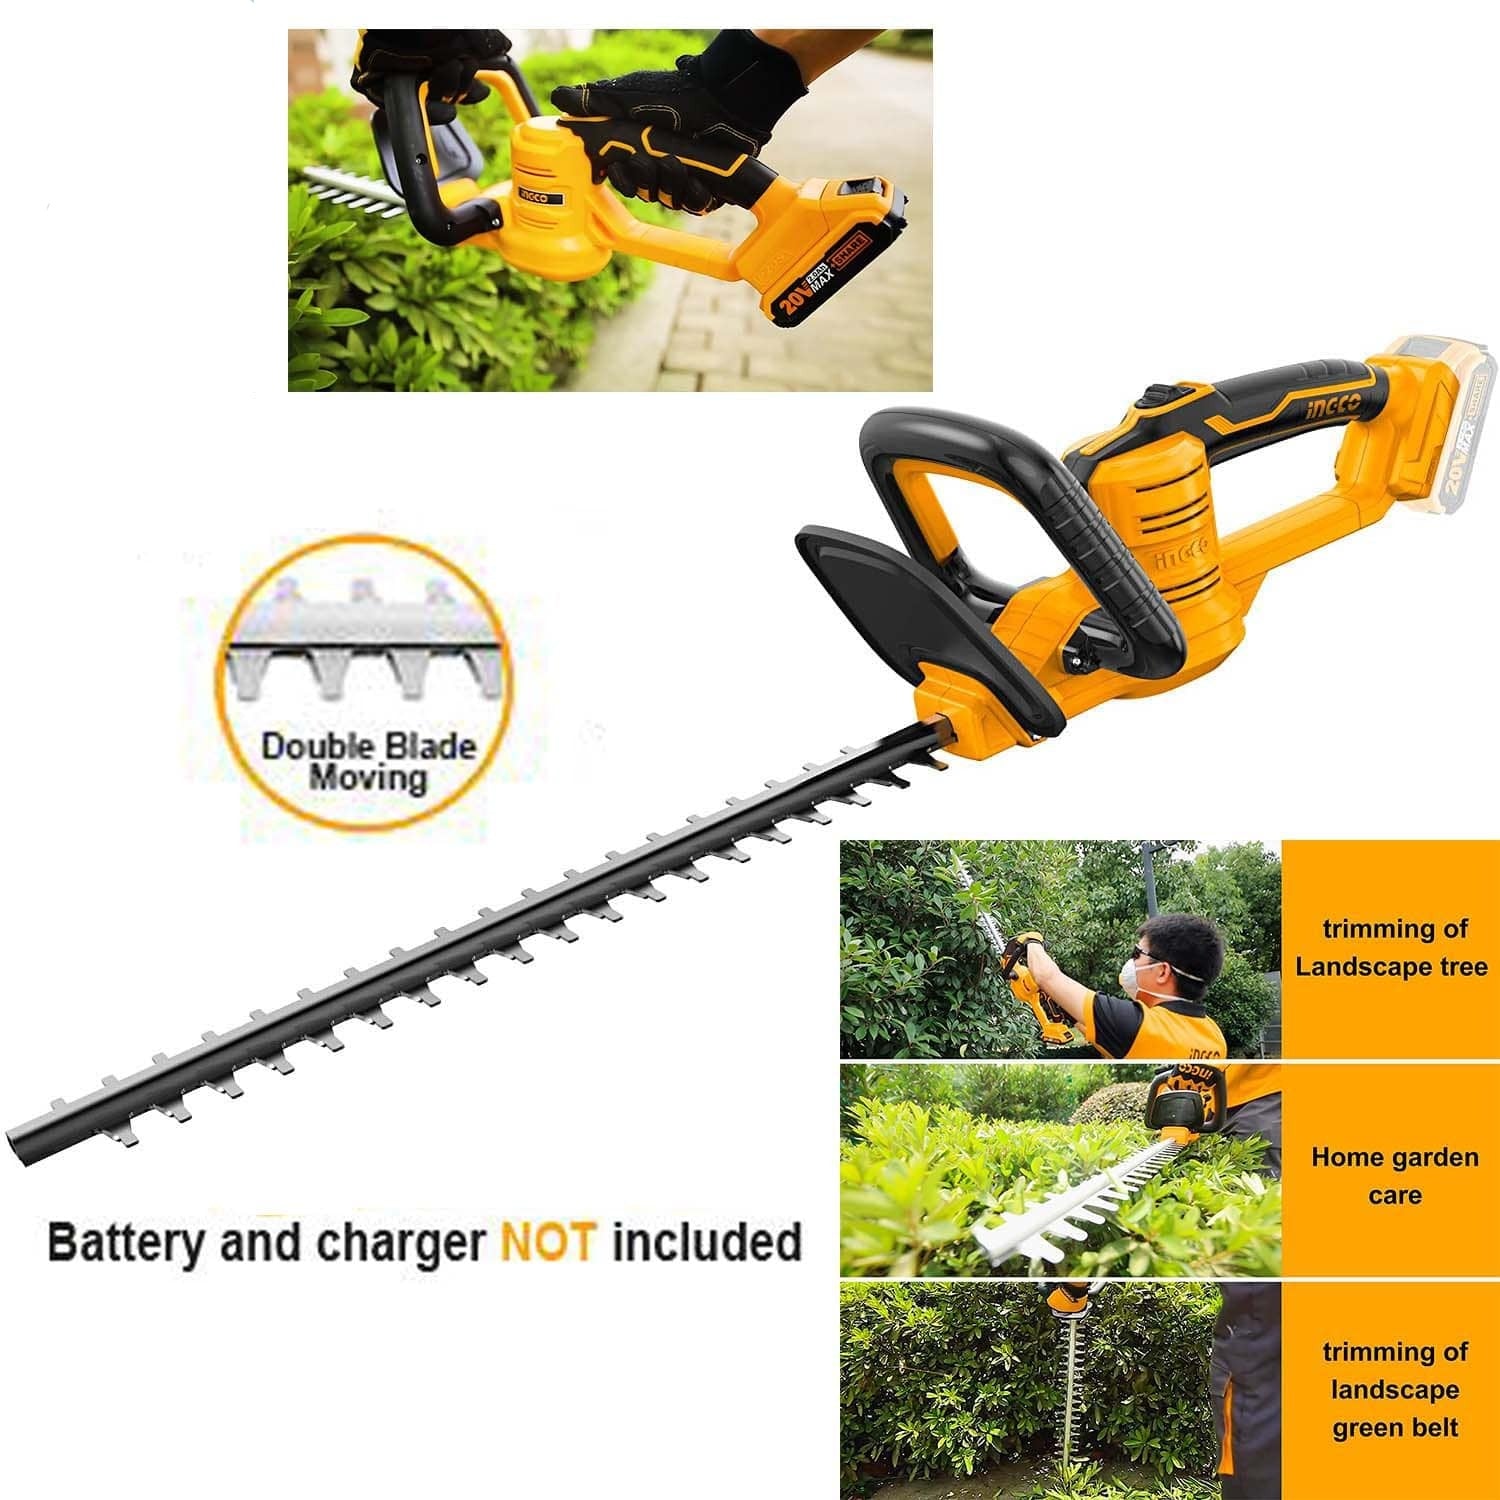 Ingco Lithium-Ion Cordless Hedge Trimmer - CHTLI20018 | Buy Online in Accra, Ghana - Supply Master Trimmer Buy Tools hardware Building materials